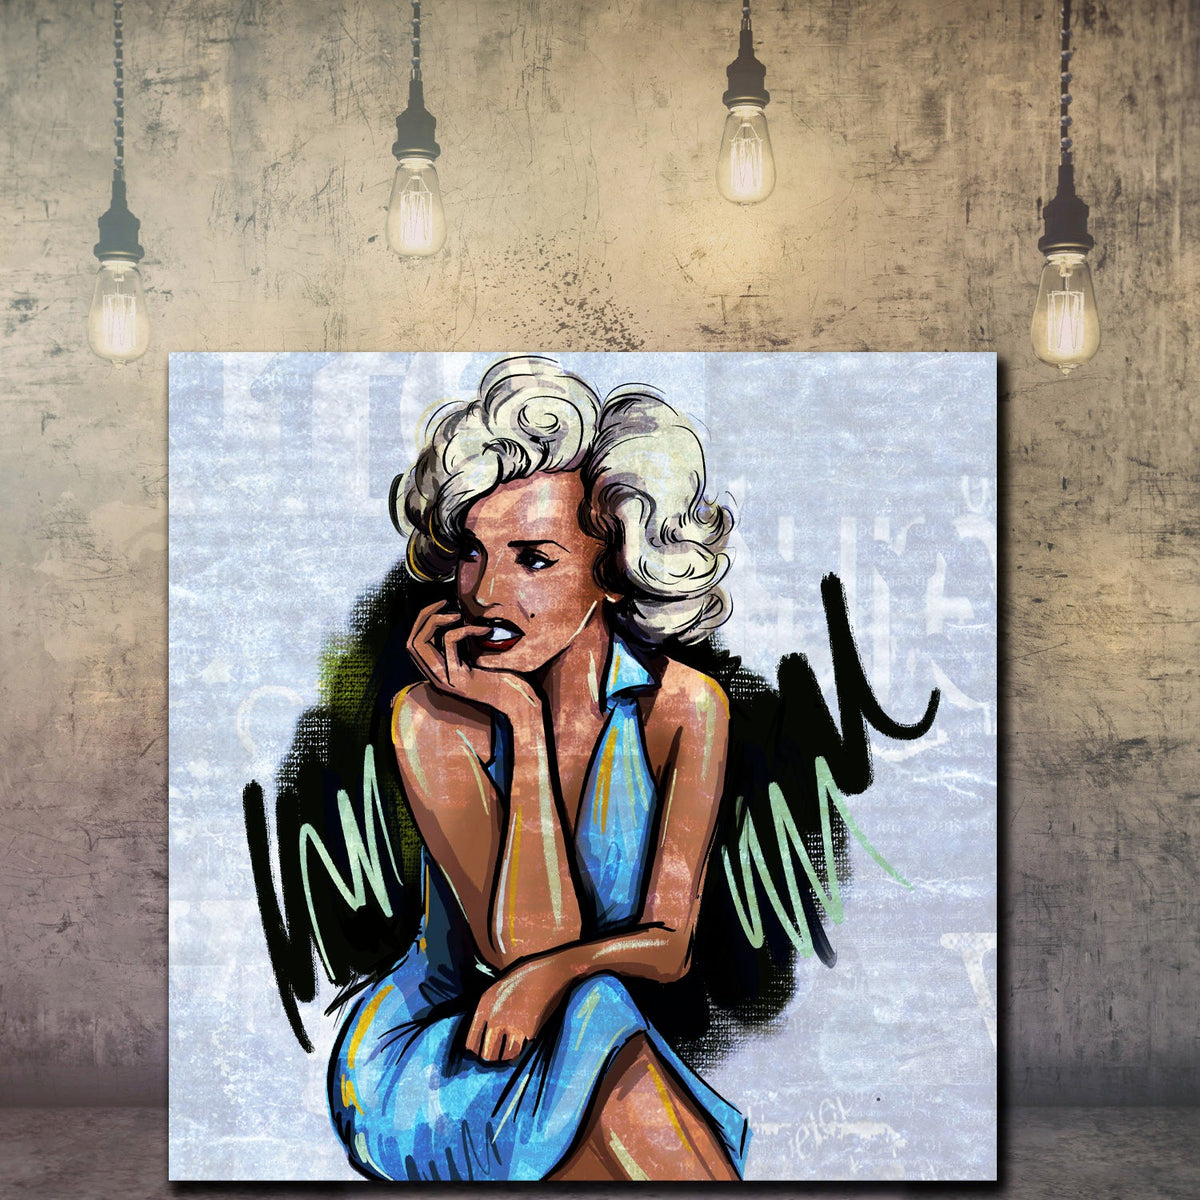 https://cdn.shopify.com/s/files/1/0387/9986/8044/products/MarilynMonroePin-UpCanvasArtprintStretched-1.jpg